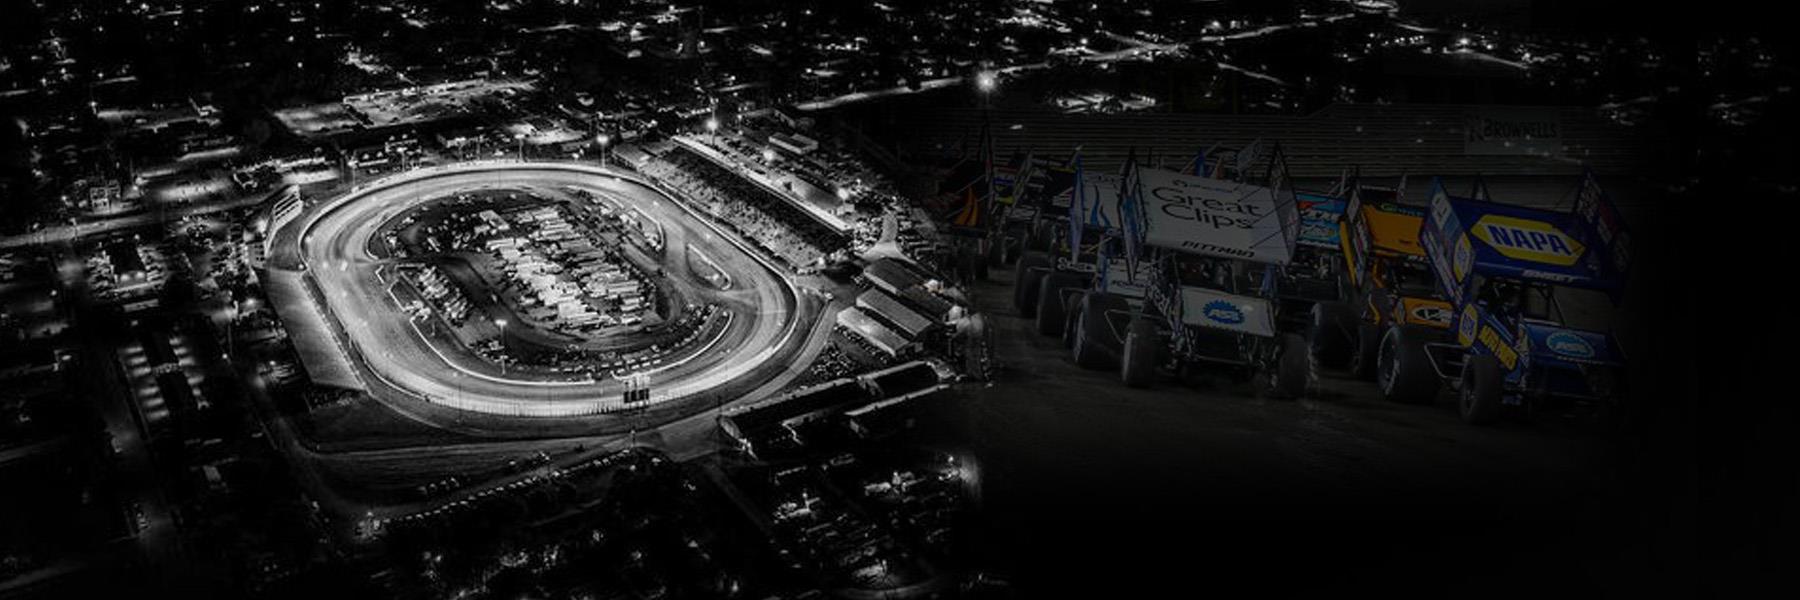 8/13/2021 - Knoxville Raceway